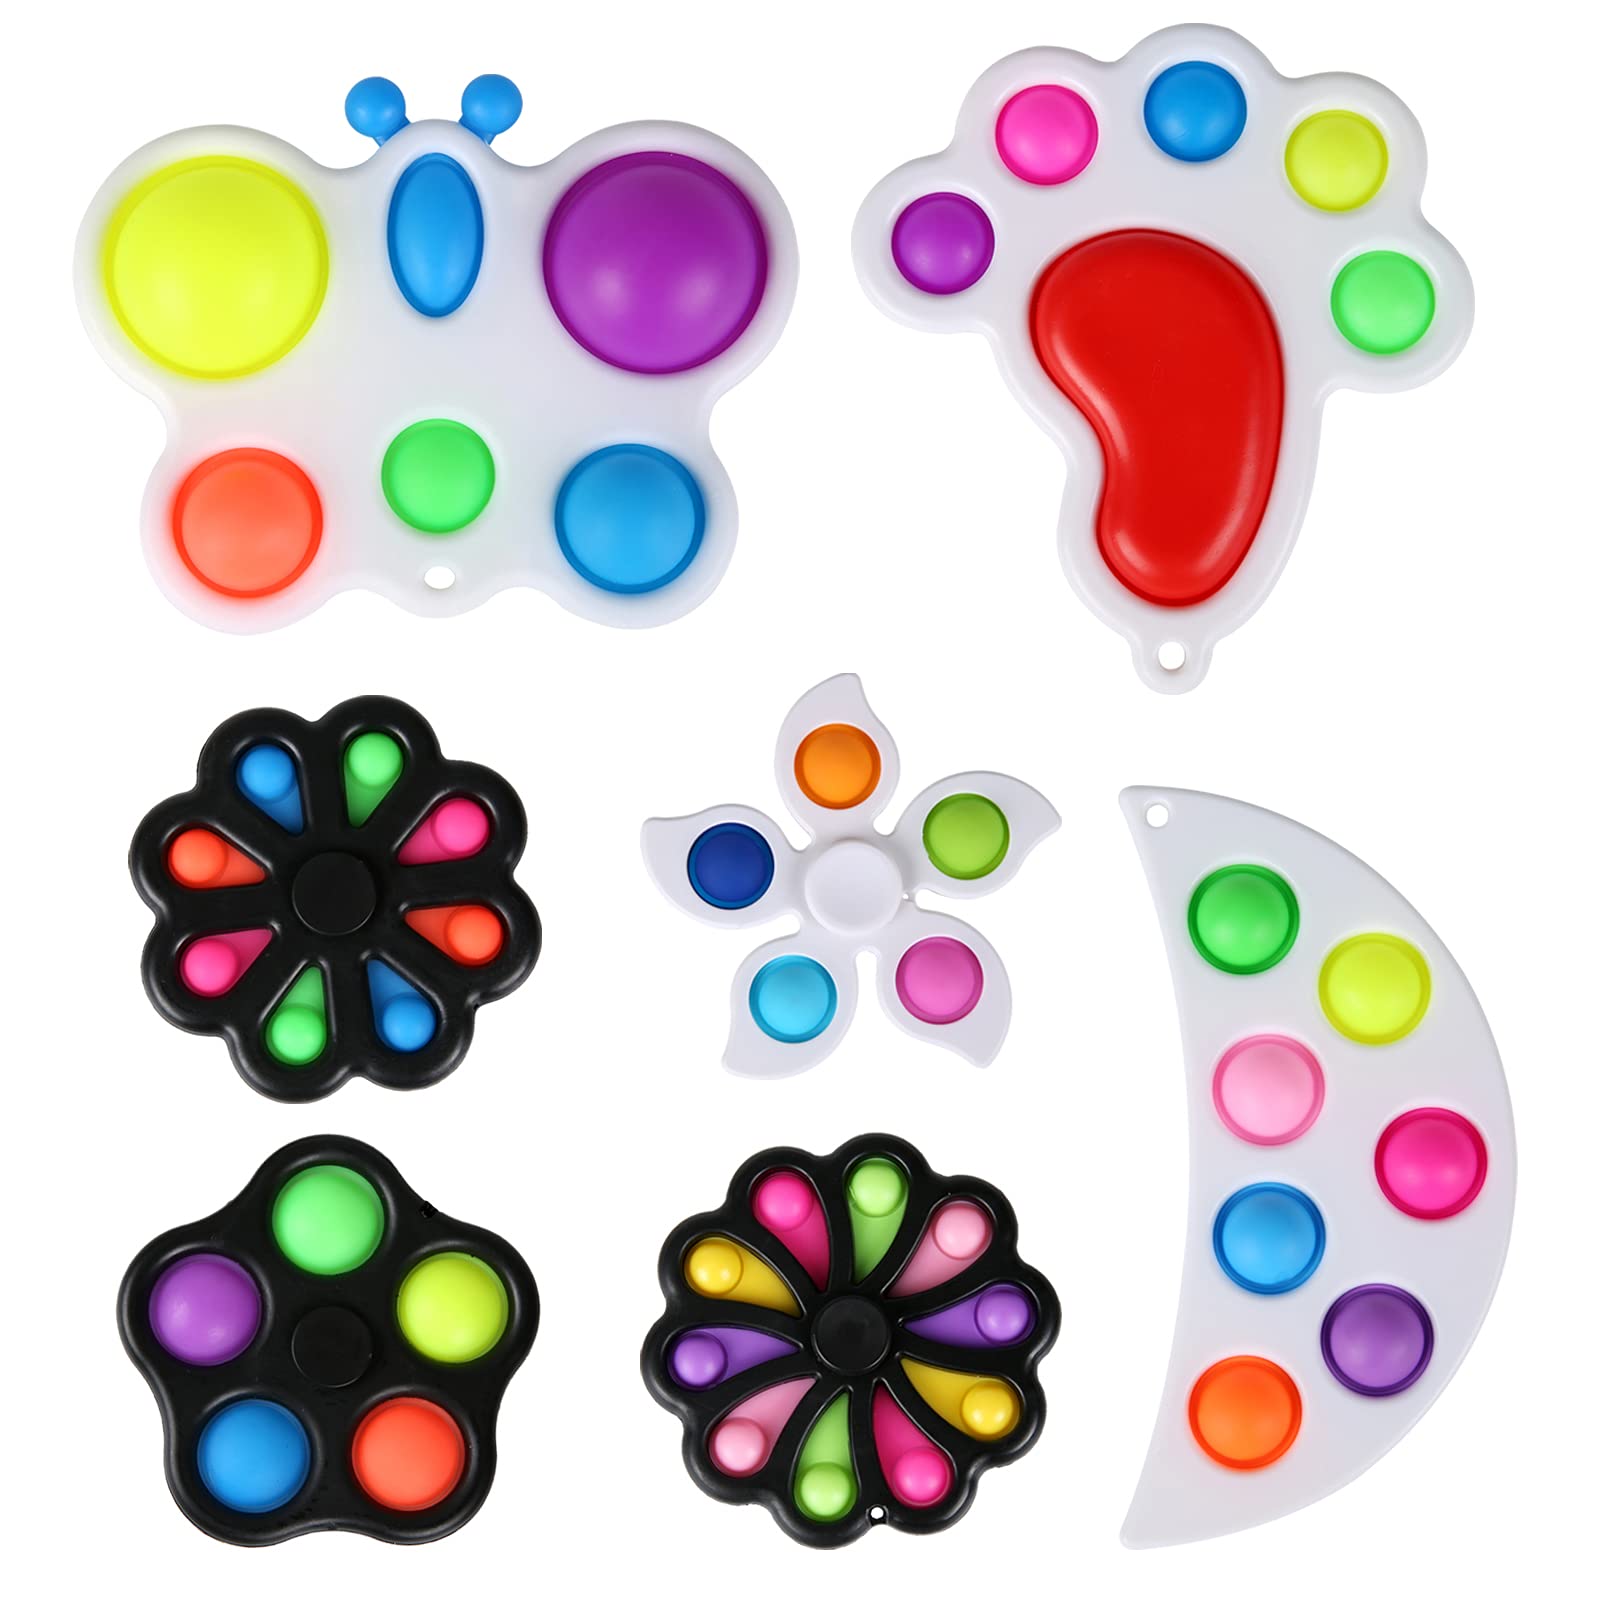 Simple Dimple Fidget Pack, 7pcs Fidget Dimple Toys Set with Fidget Dimples for Kids and Adults Anti Stress and Anxiety Tools Bundle